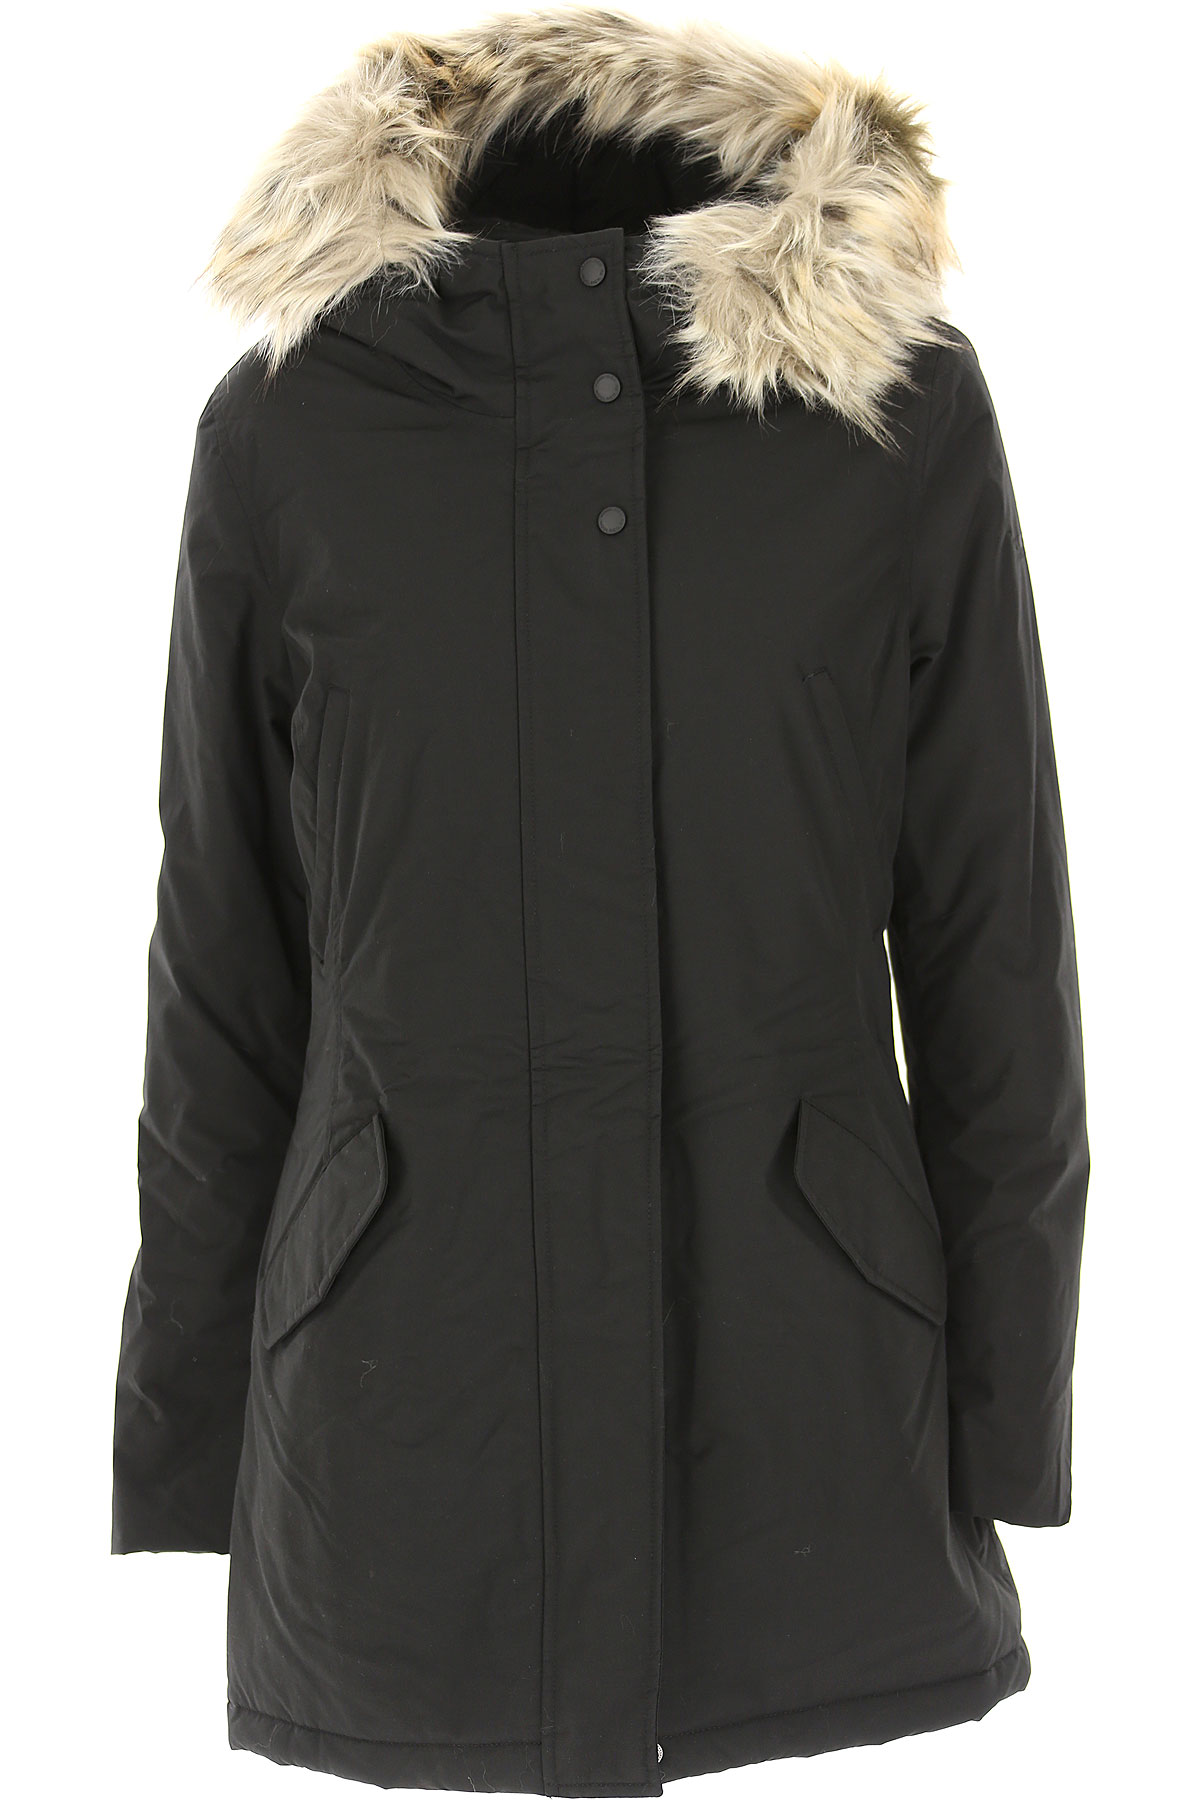 Womens Clothing Woolrich, Style code: wycps0575-ut0001-blk